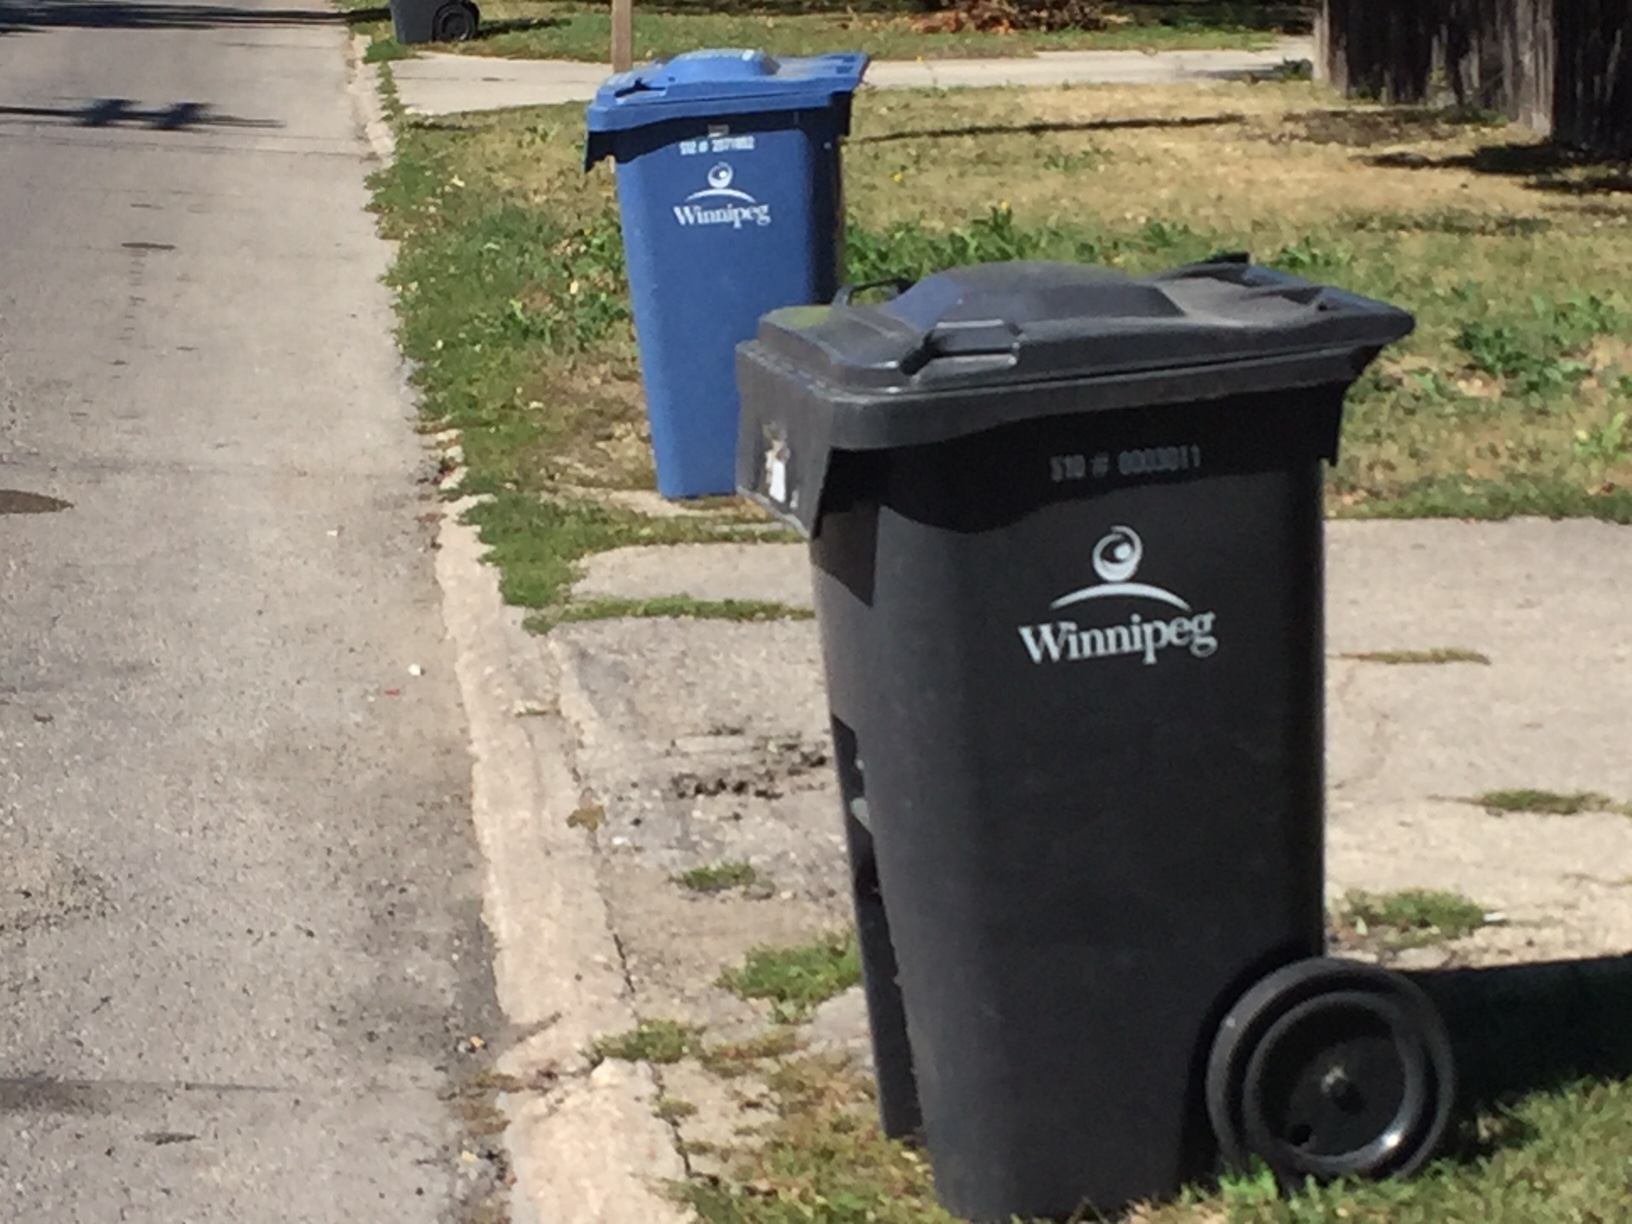 City of Winnipeg asks residents for input on garbage and recycling programs